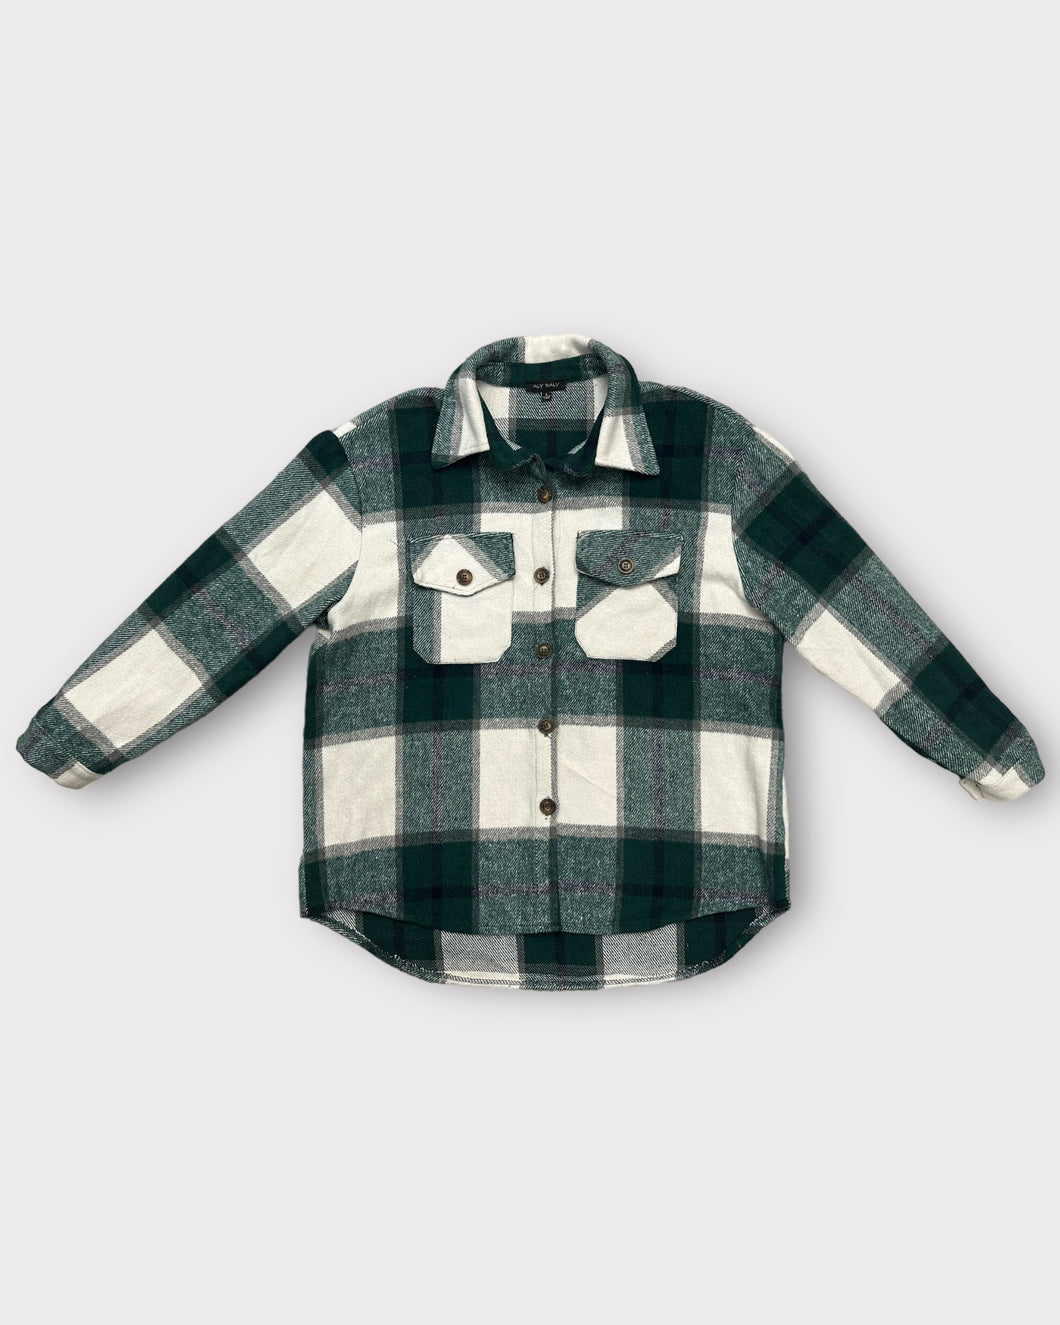 Aly Daly Green Plaid Shacket (L)